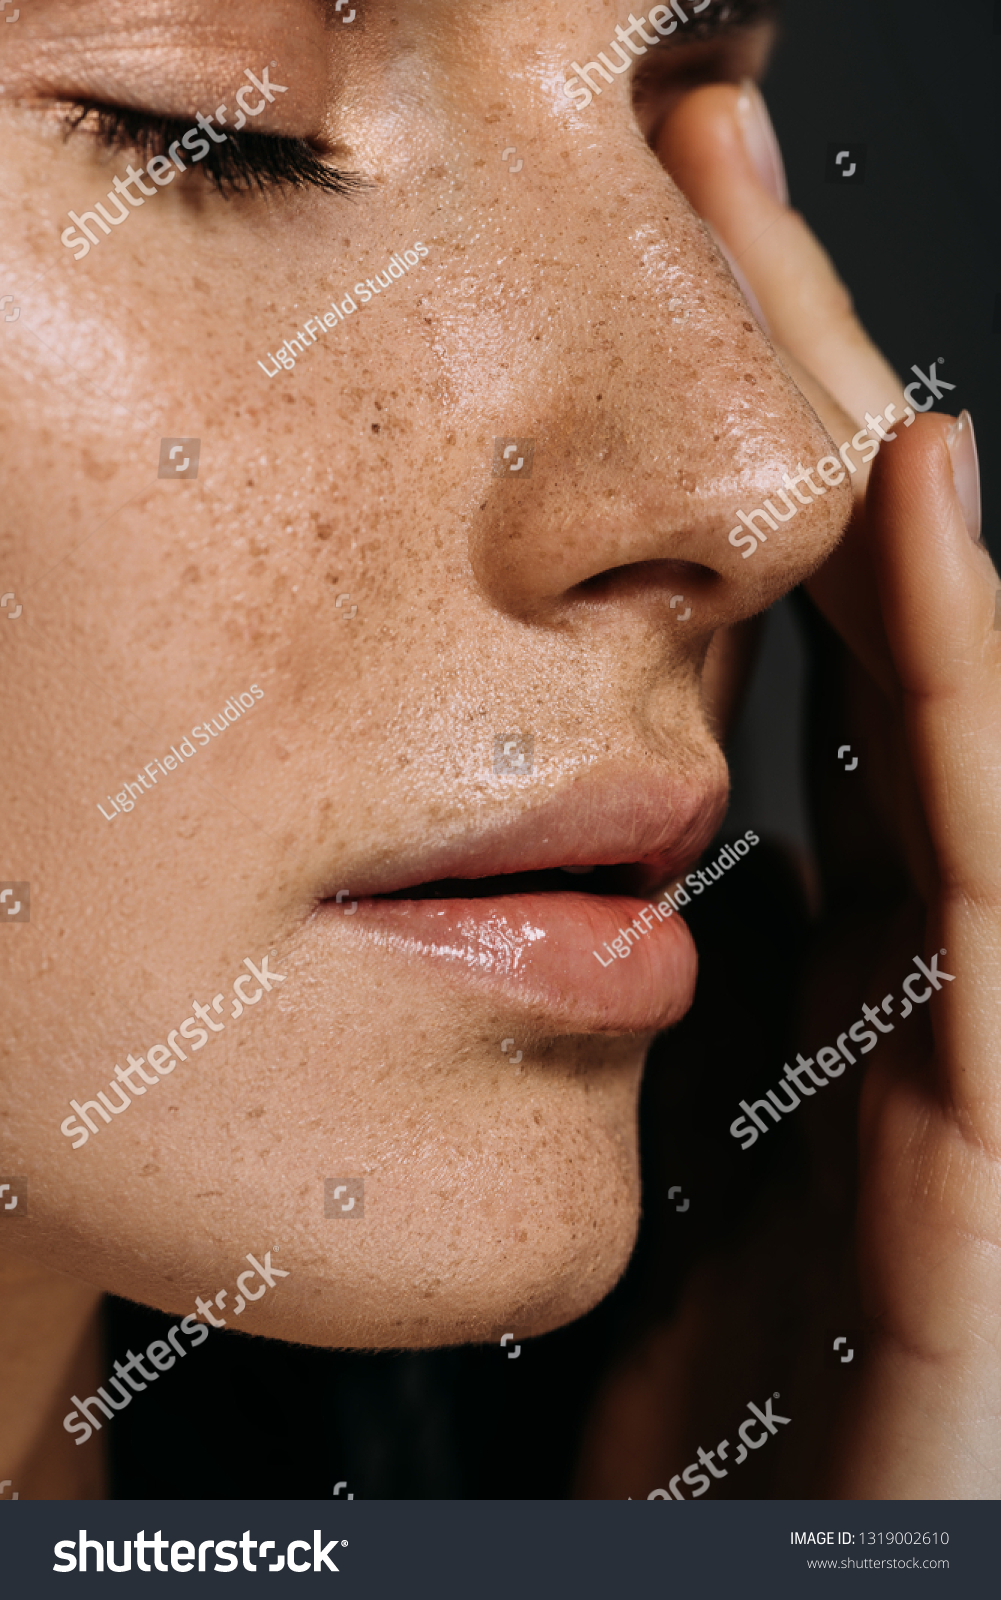 close up view of tender woman with freckles on face isolated on grey #1319002610